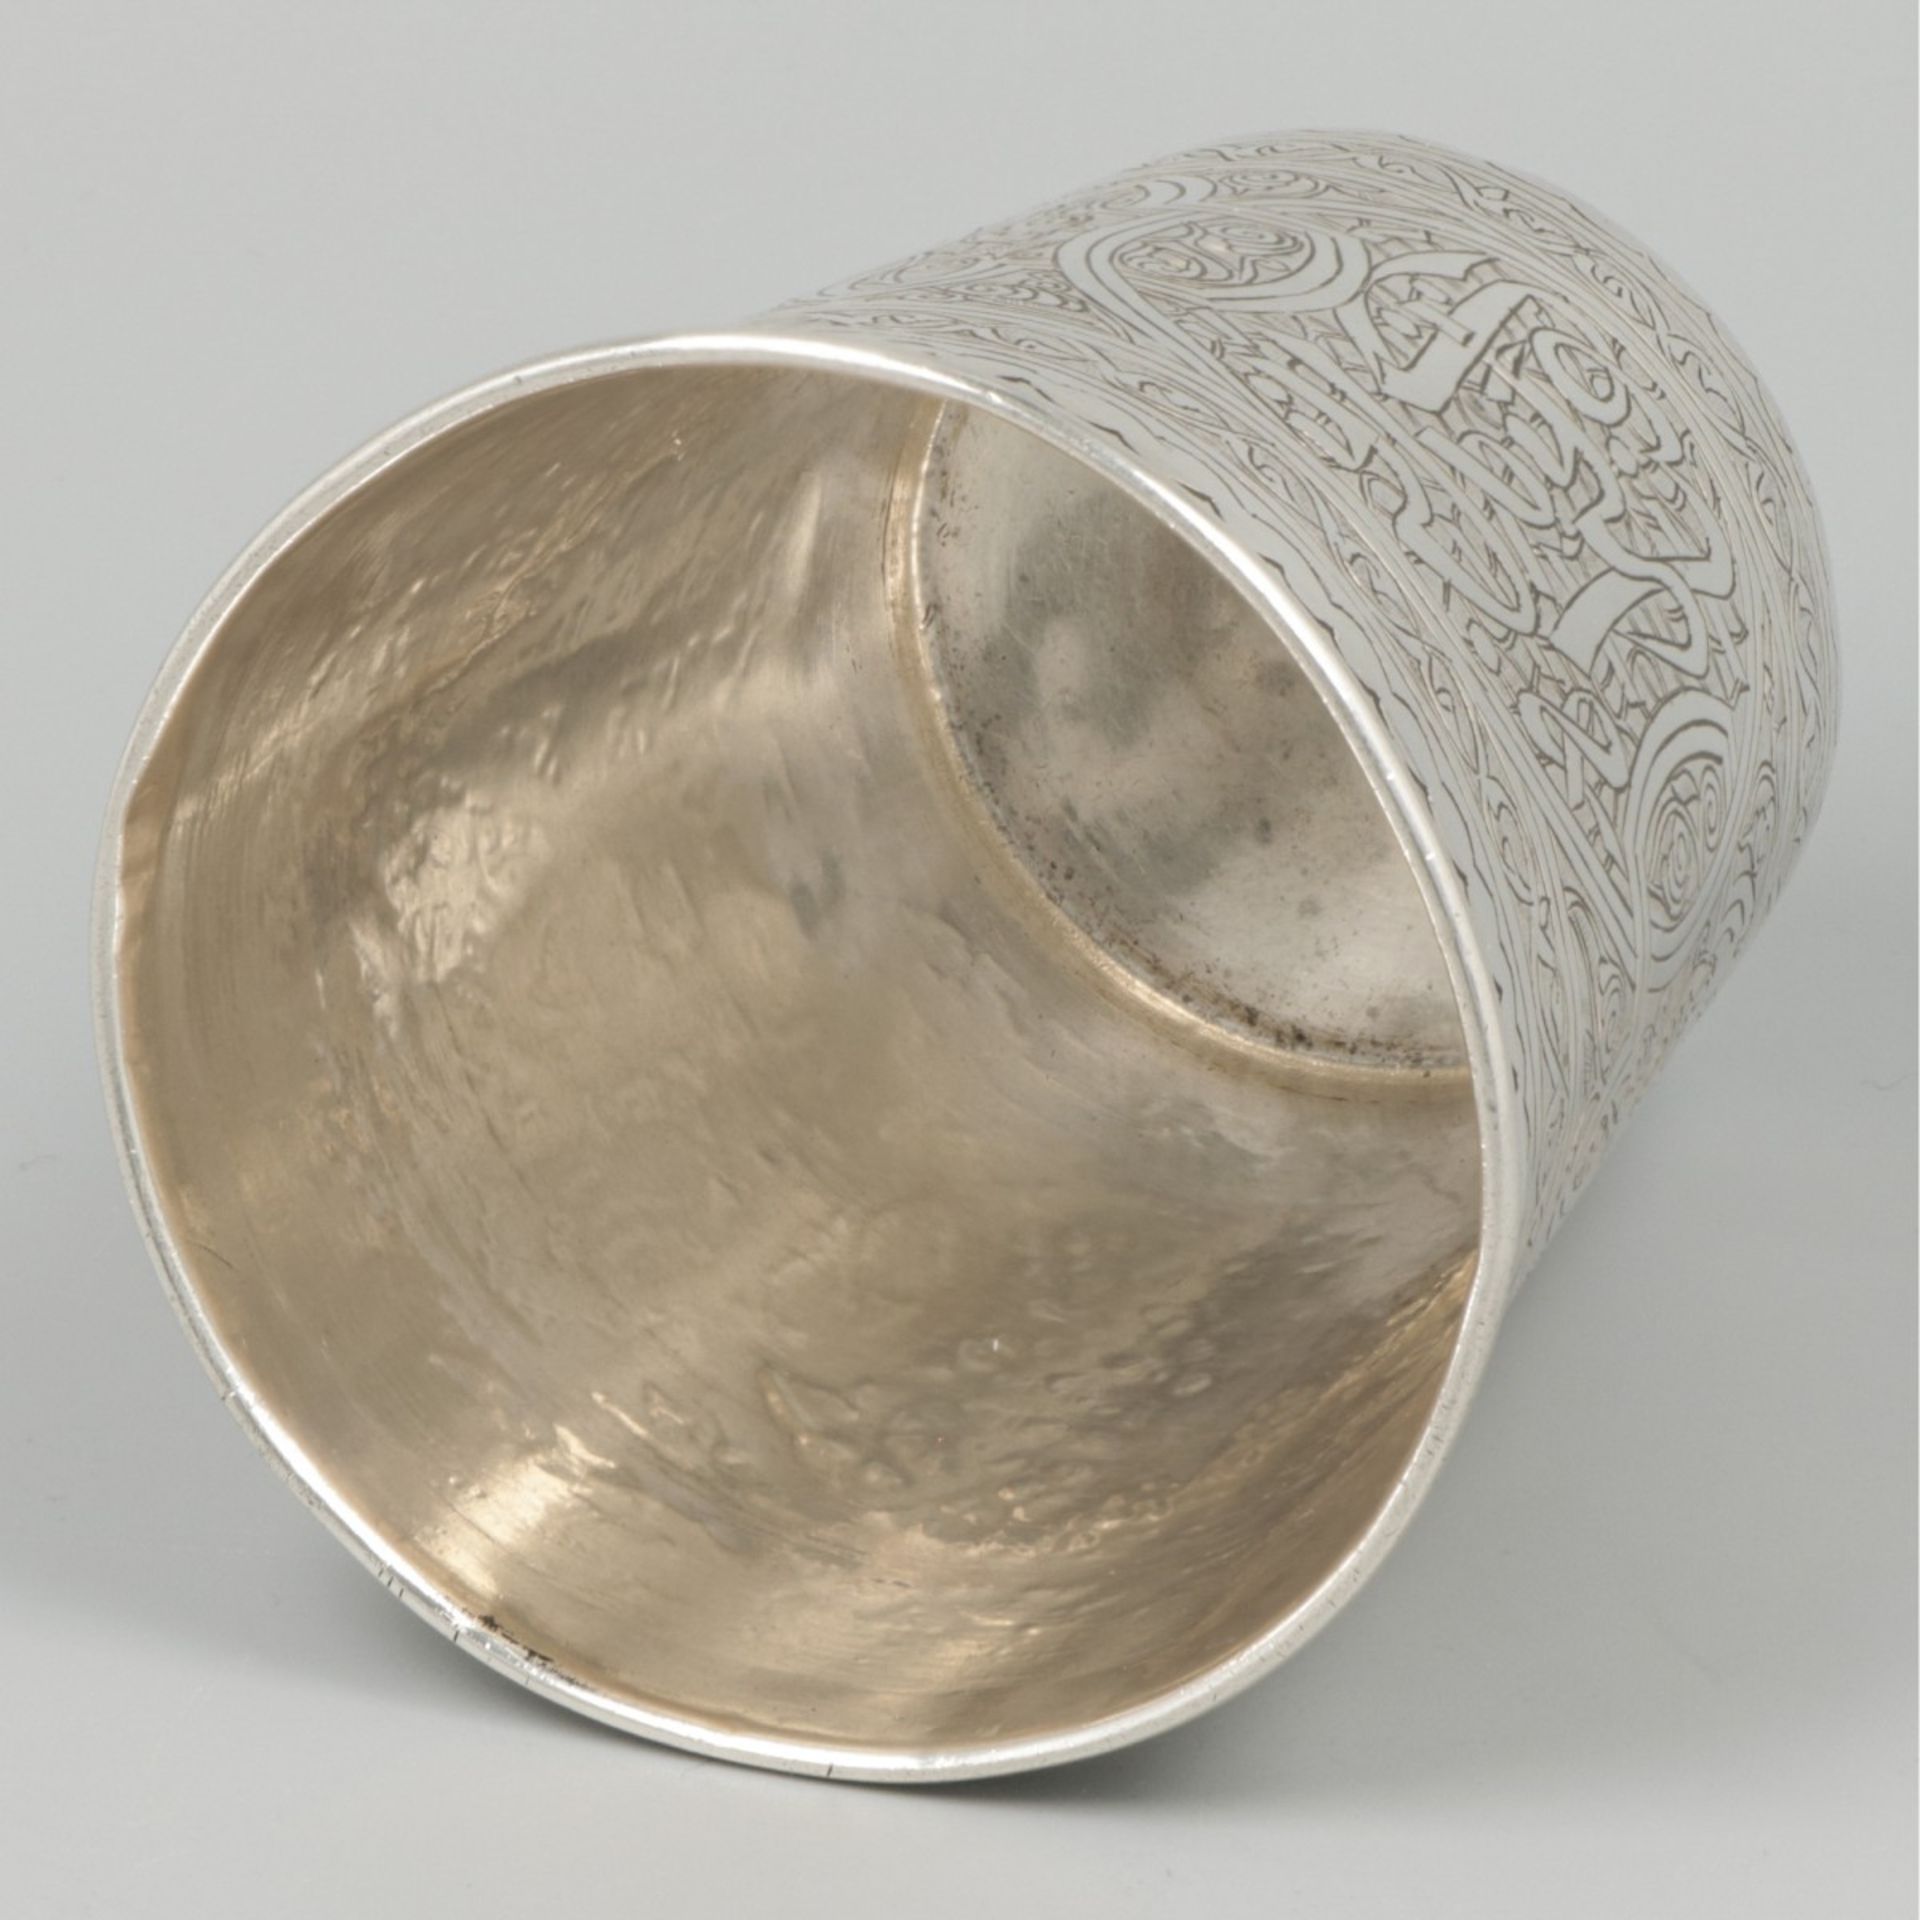 Drinking cup silver. - Image 4 of 6